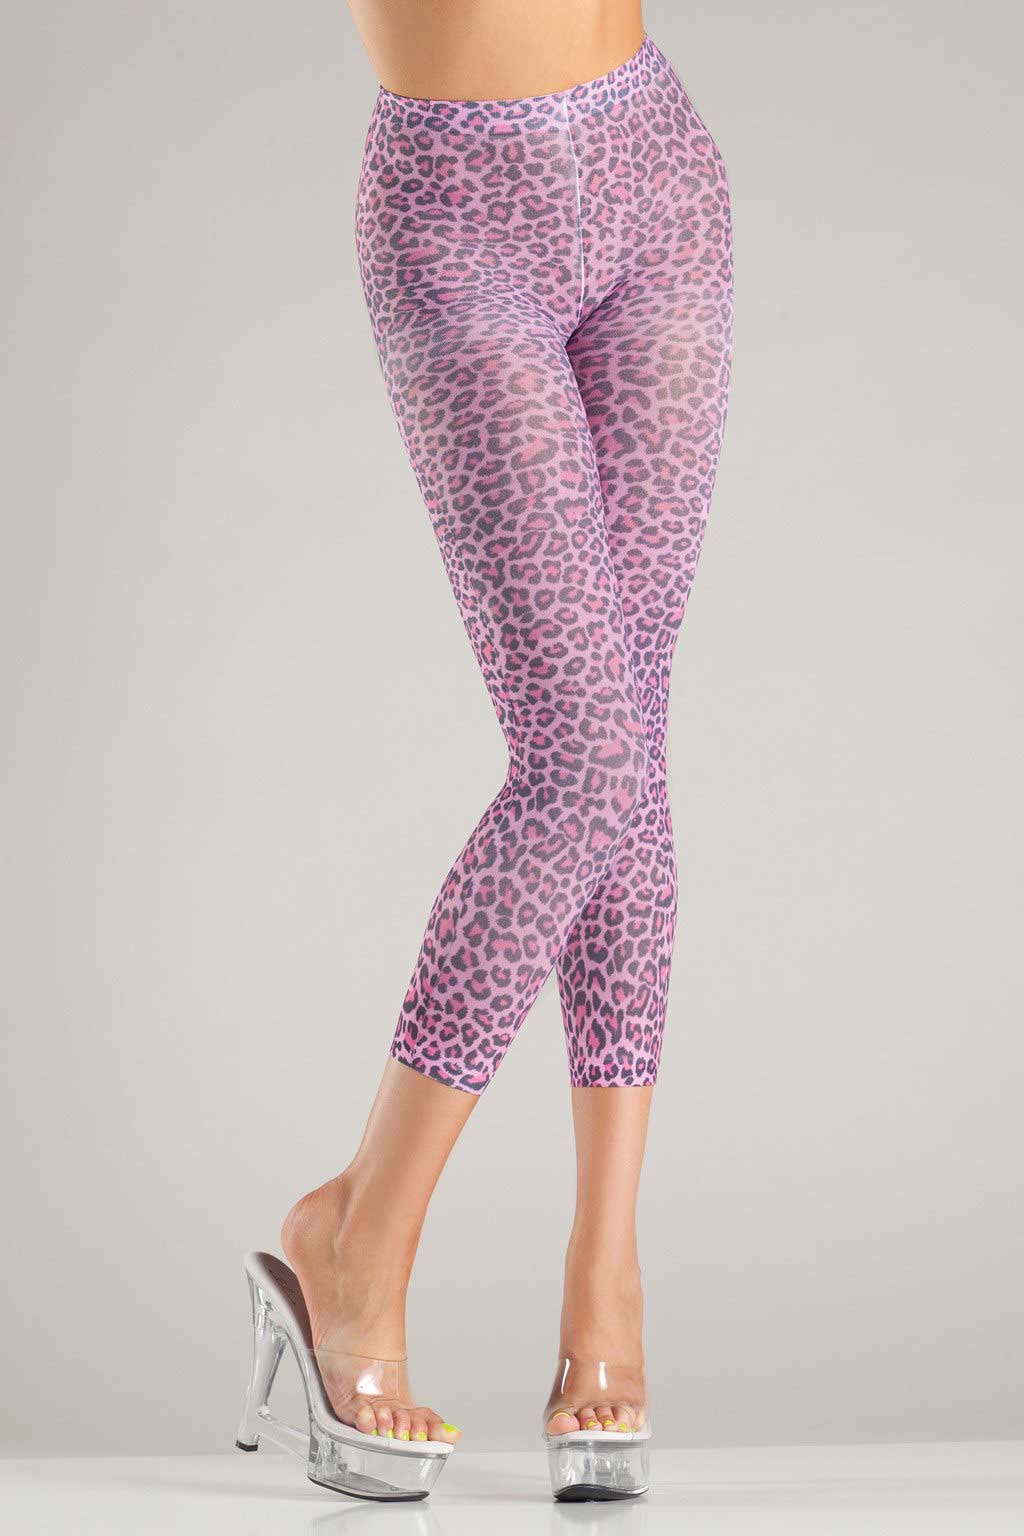 BeWicked BW713 Pink Leopard Pantyhose SPECIAL in Specials - $9.99